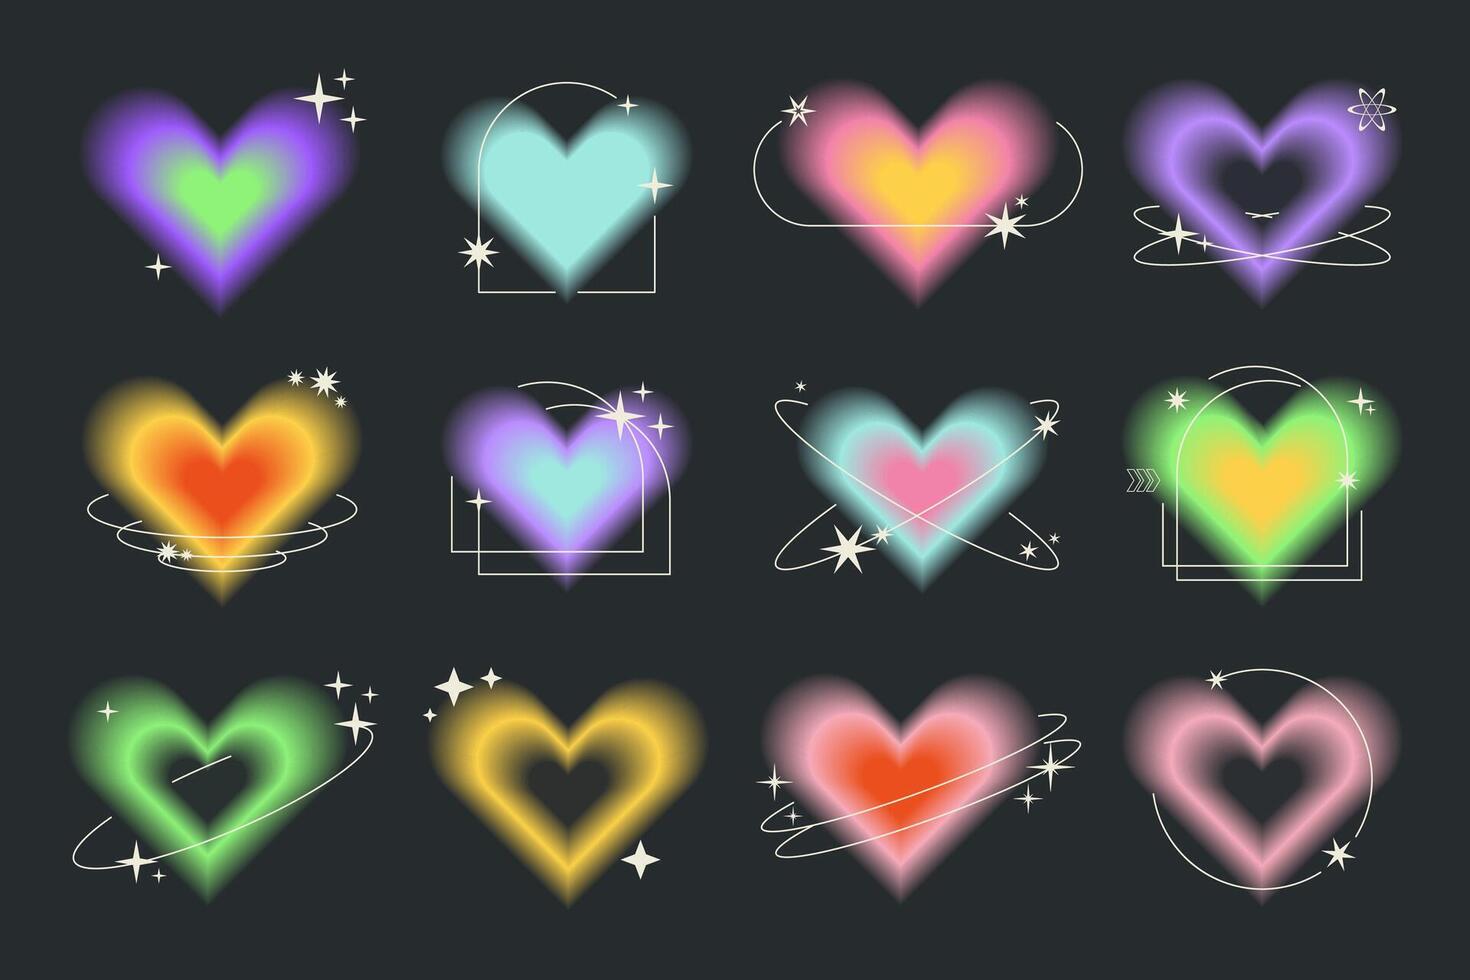 Y2k aesthetic blurred gradient aura hearts with linear circles, stars. Trendy set of modern blurry figures in brutalism style. Romantic transparent heart elements for social media background vector